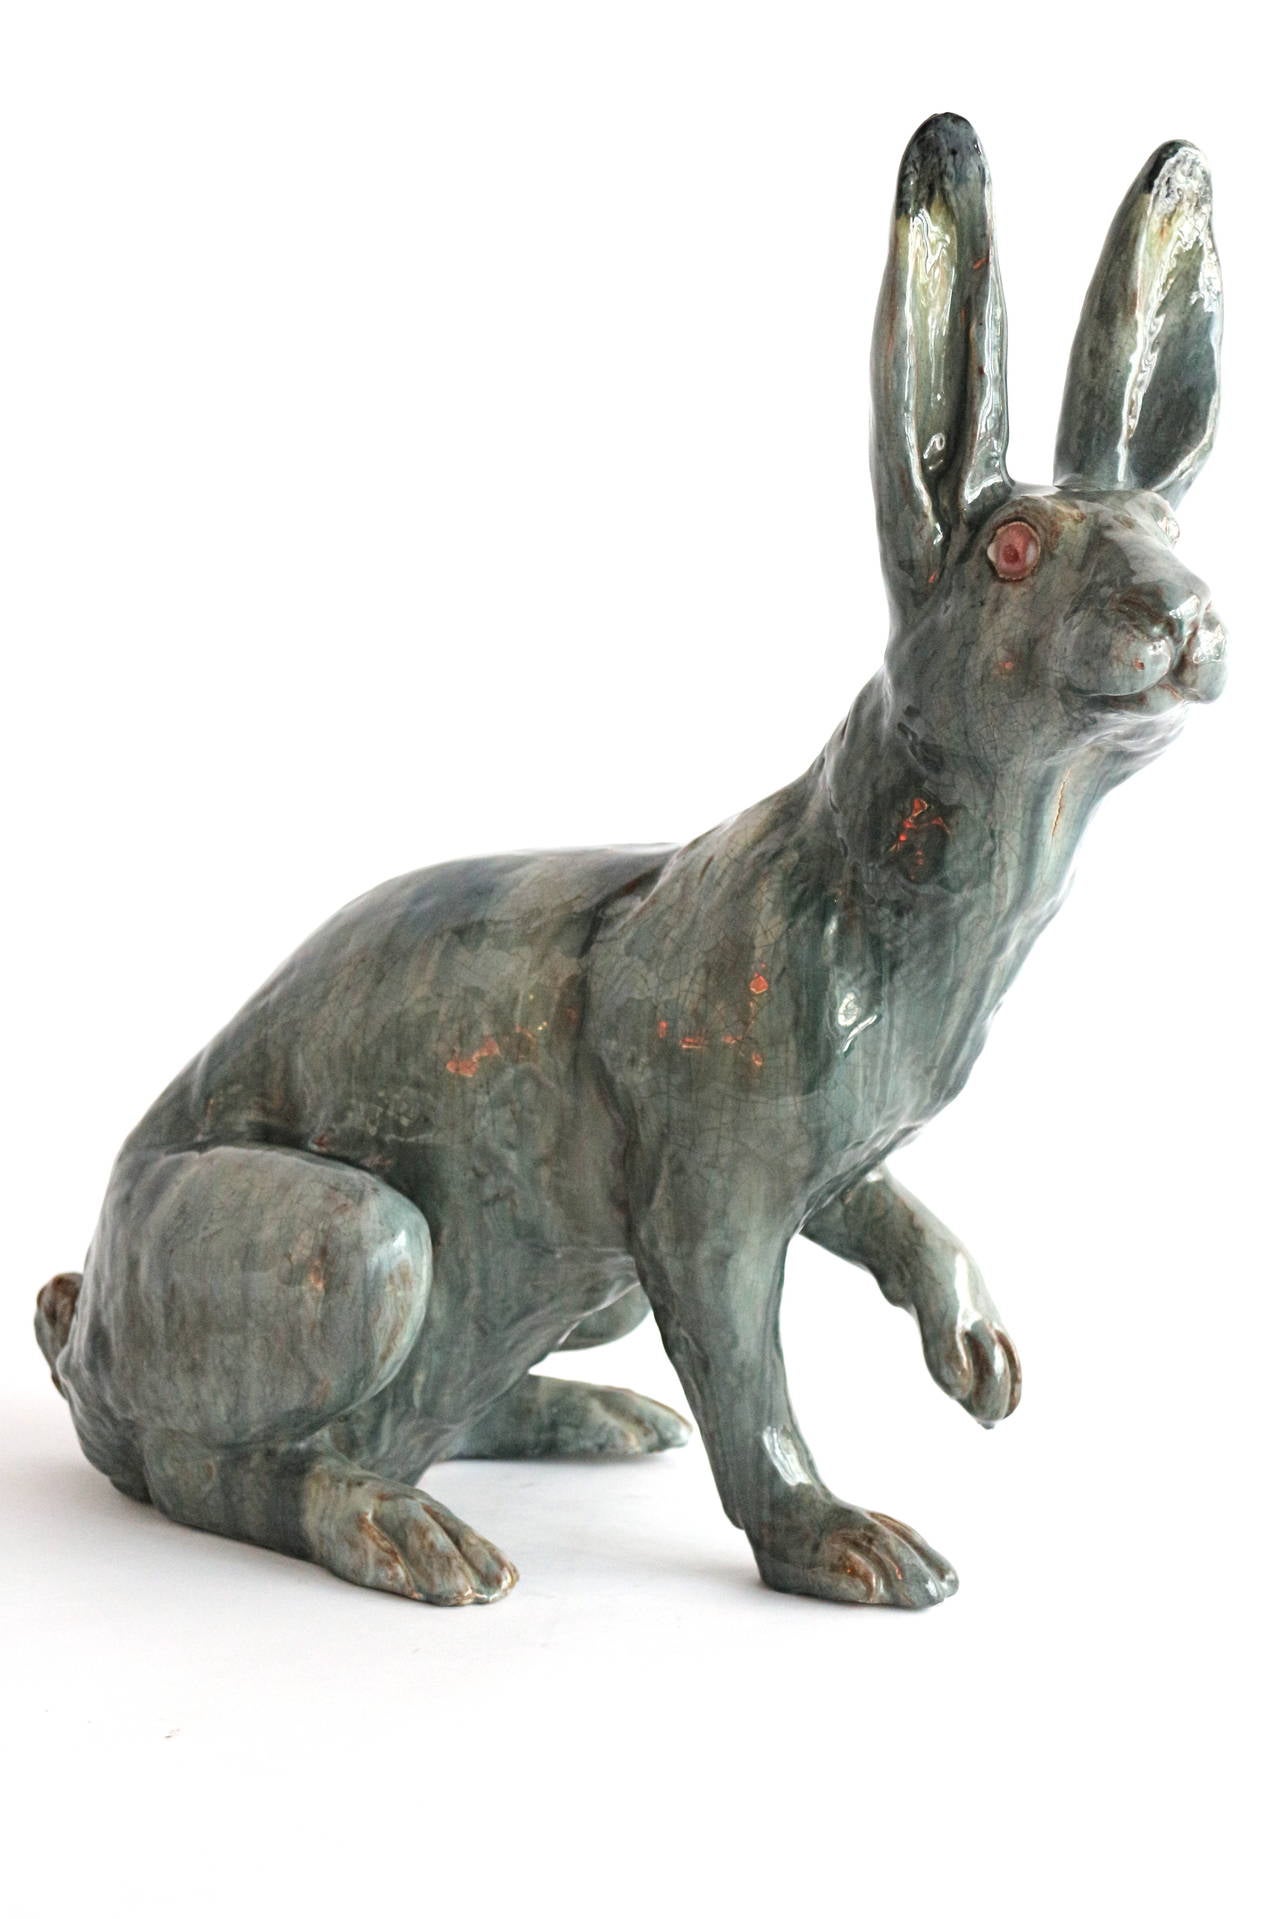 Four farm animals, made for display in butcher shop
French, late 19th-early 20st century.
Blue-green hare, glass eyes, circa 1870. Dimensions: 17.72 x 8.27 x H 17.72 inch.
Pig glass eyes, circa 1880. Dimensions: 19.69 x 6.30 x H 9.45 inch
White